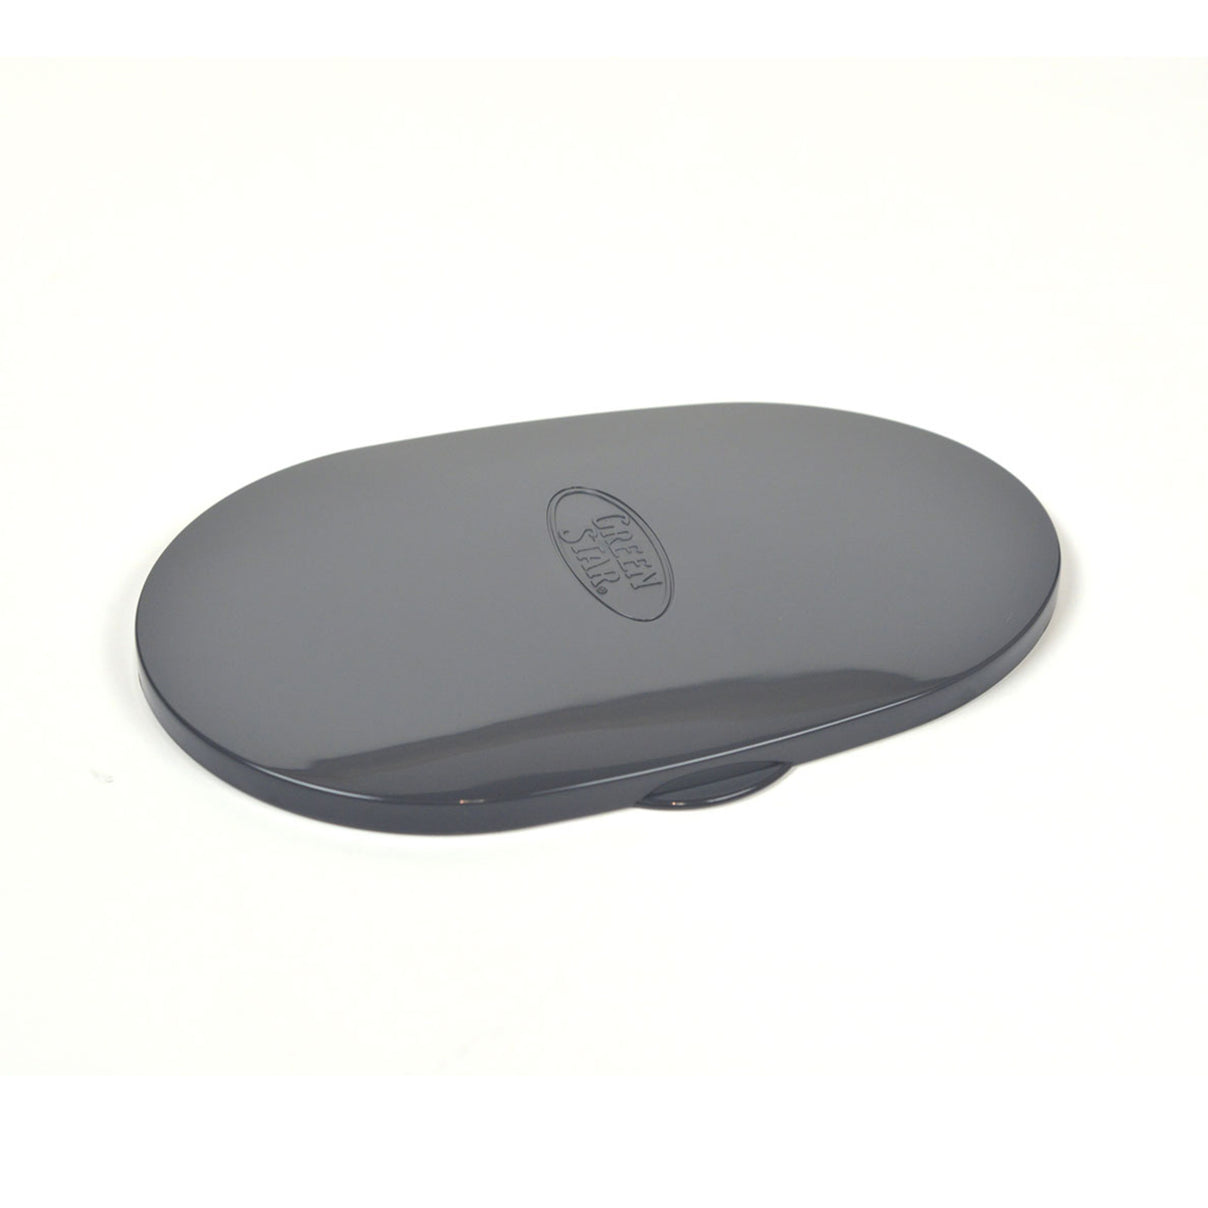 The Gray Safety Tray Lid is compatible with Greenstar® Pro in Gray (GS-P502).